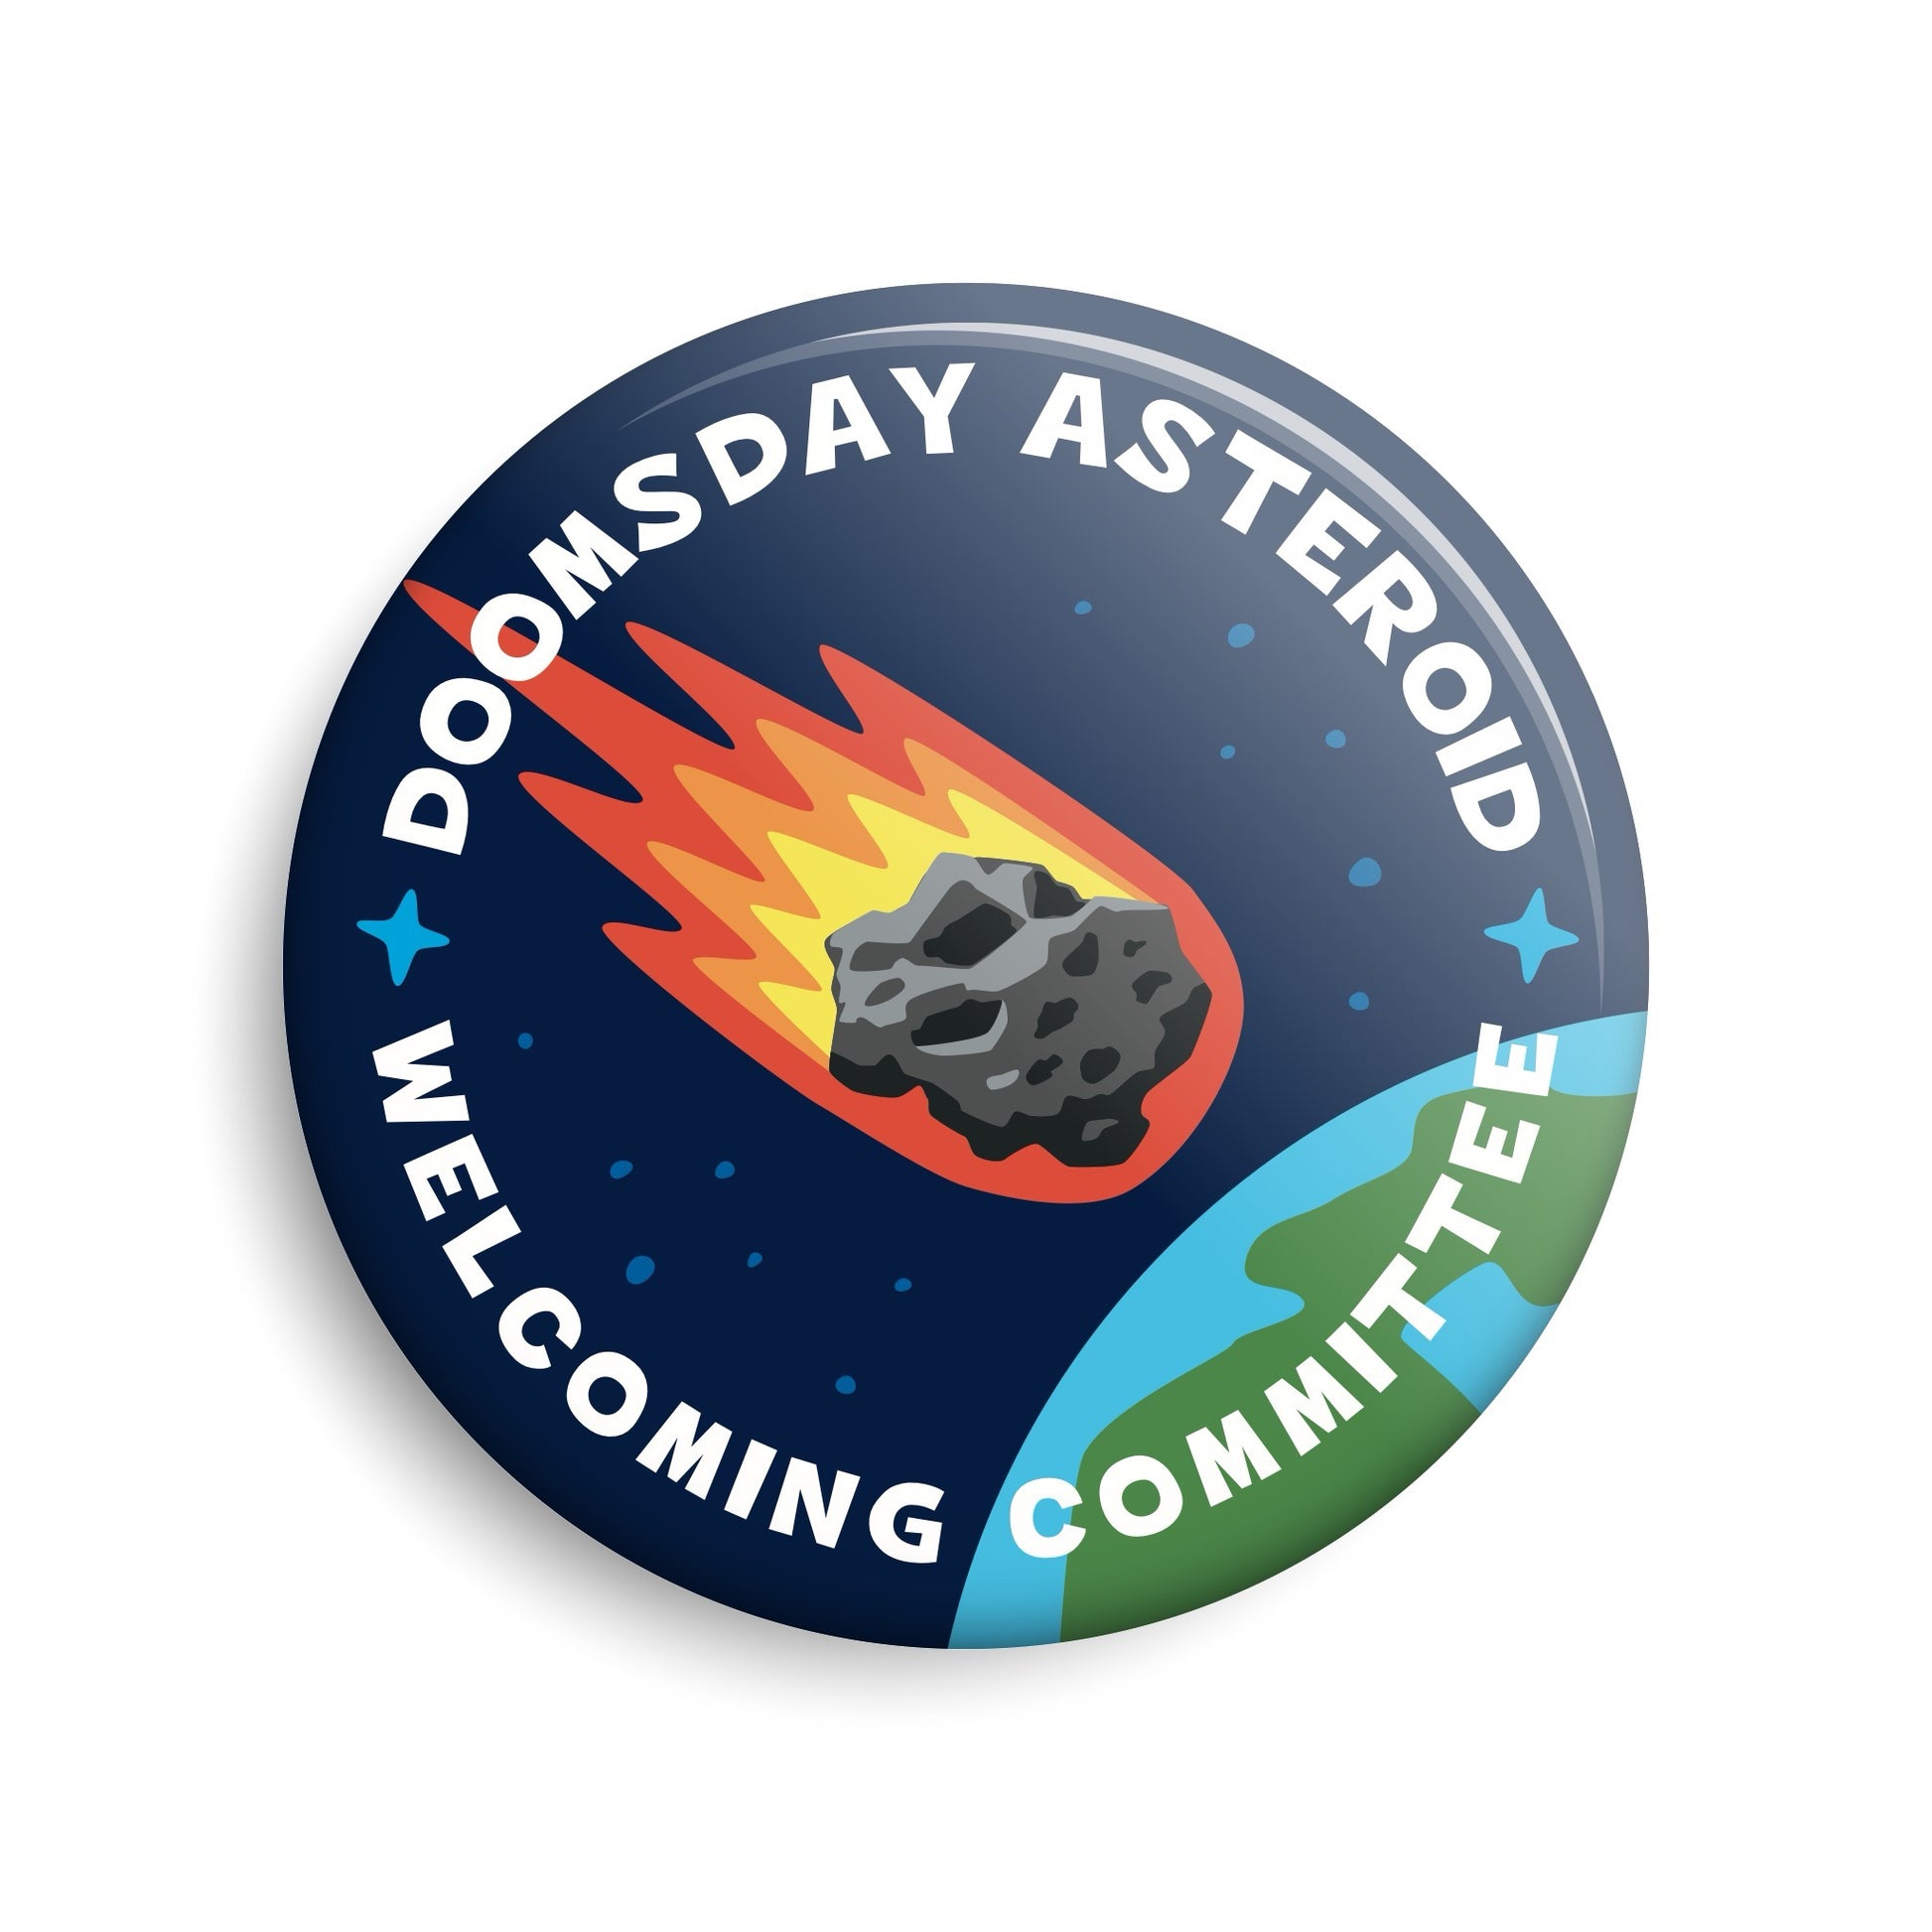 Doomsday Asteroid Welcoming Committee pin-back button